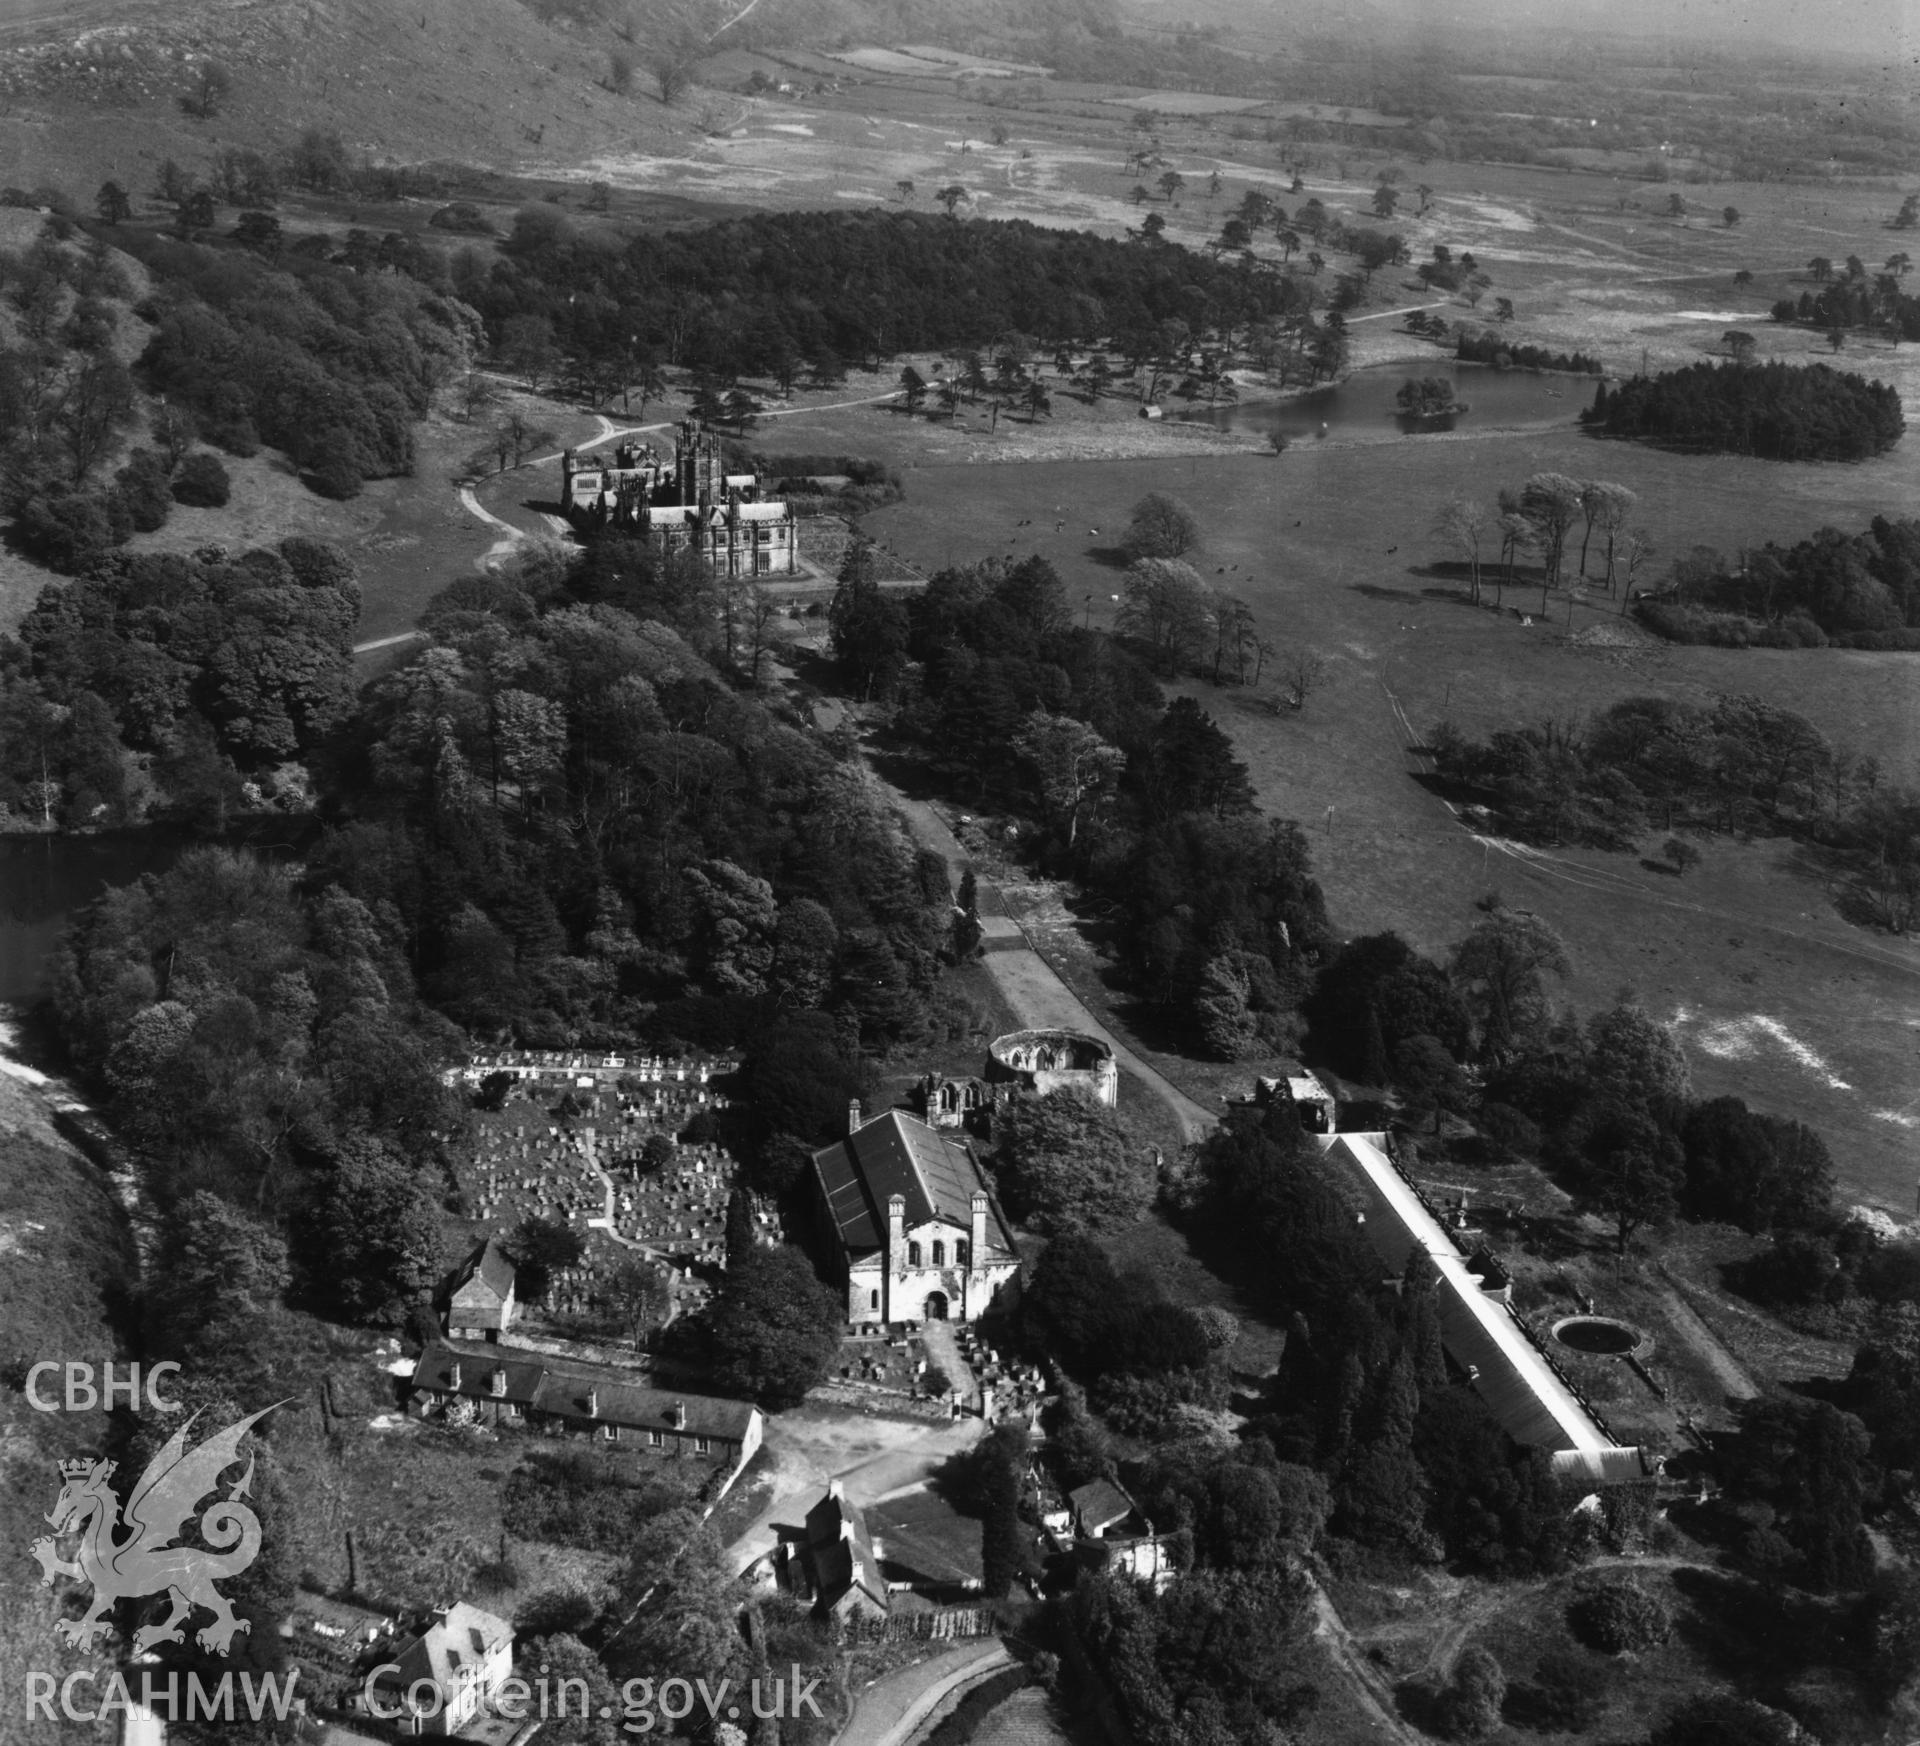 View of Margam Park showing St Mary's church and graveyard, orangery and chapter house ruins. Oblique aerial photograph, 5?" cut roll film.